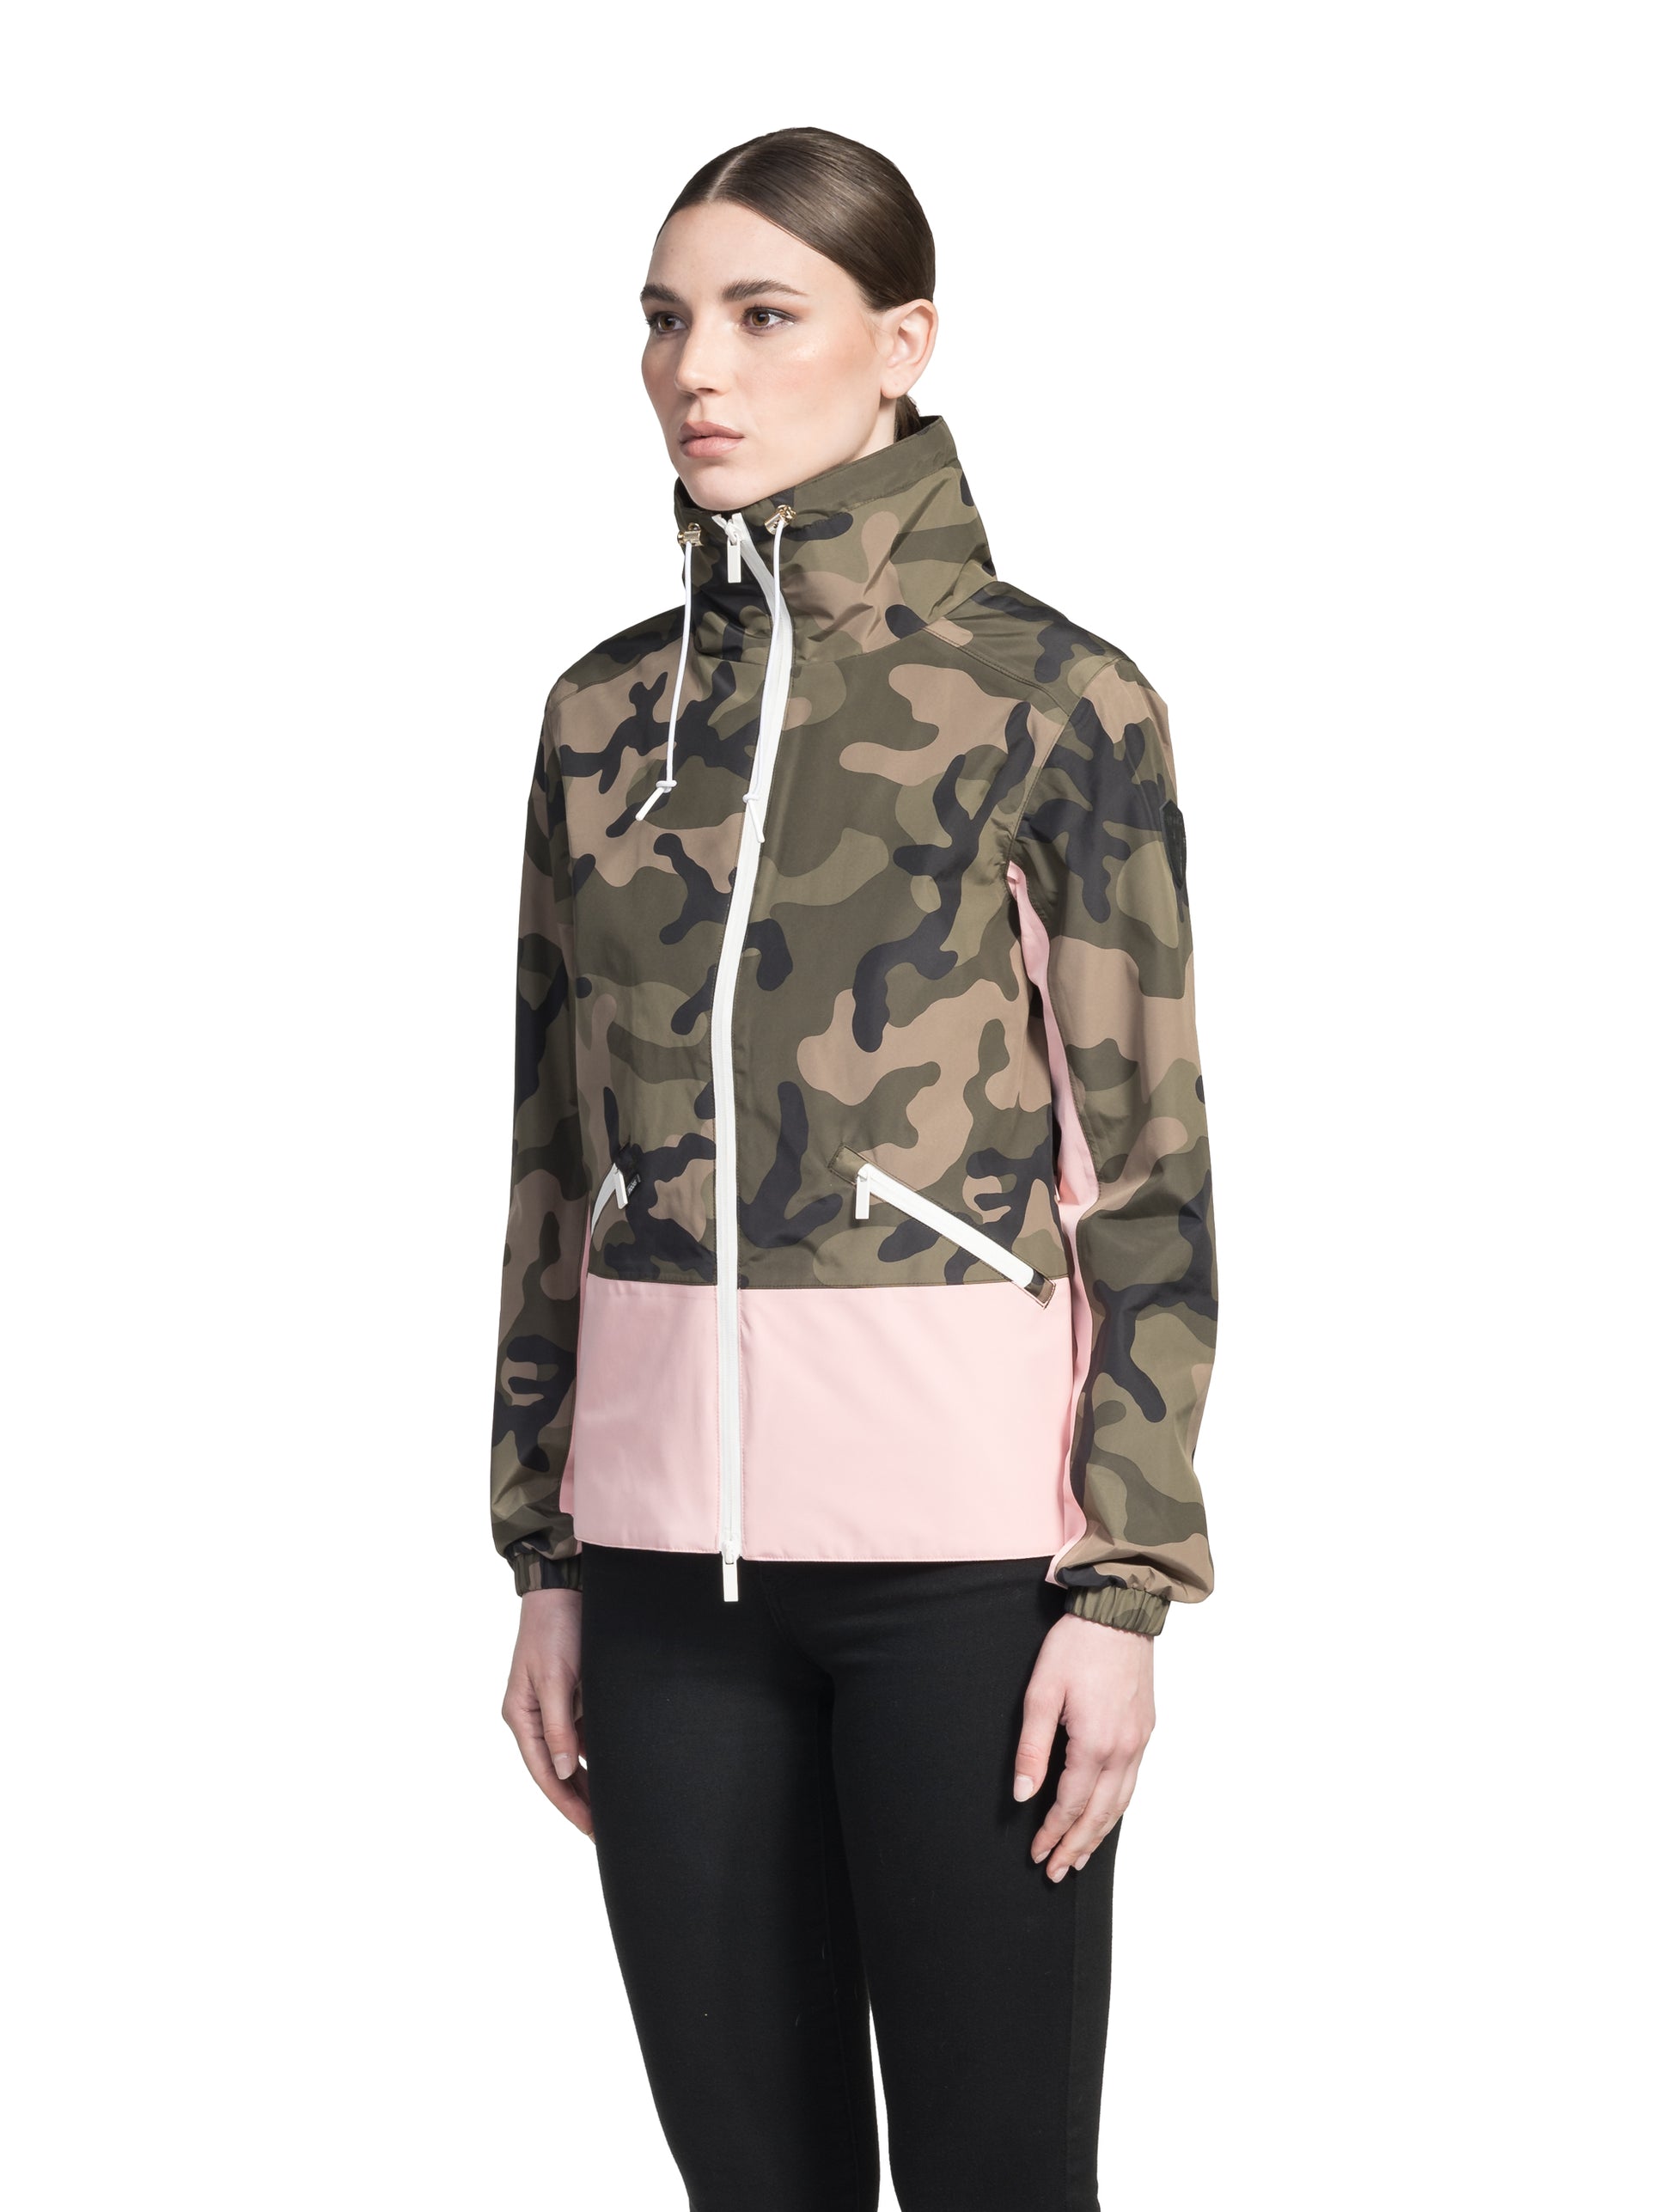 Leah waist length women's jacket in the Camo/Shell Pink